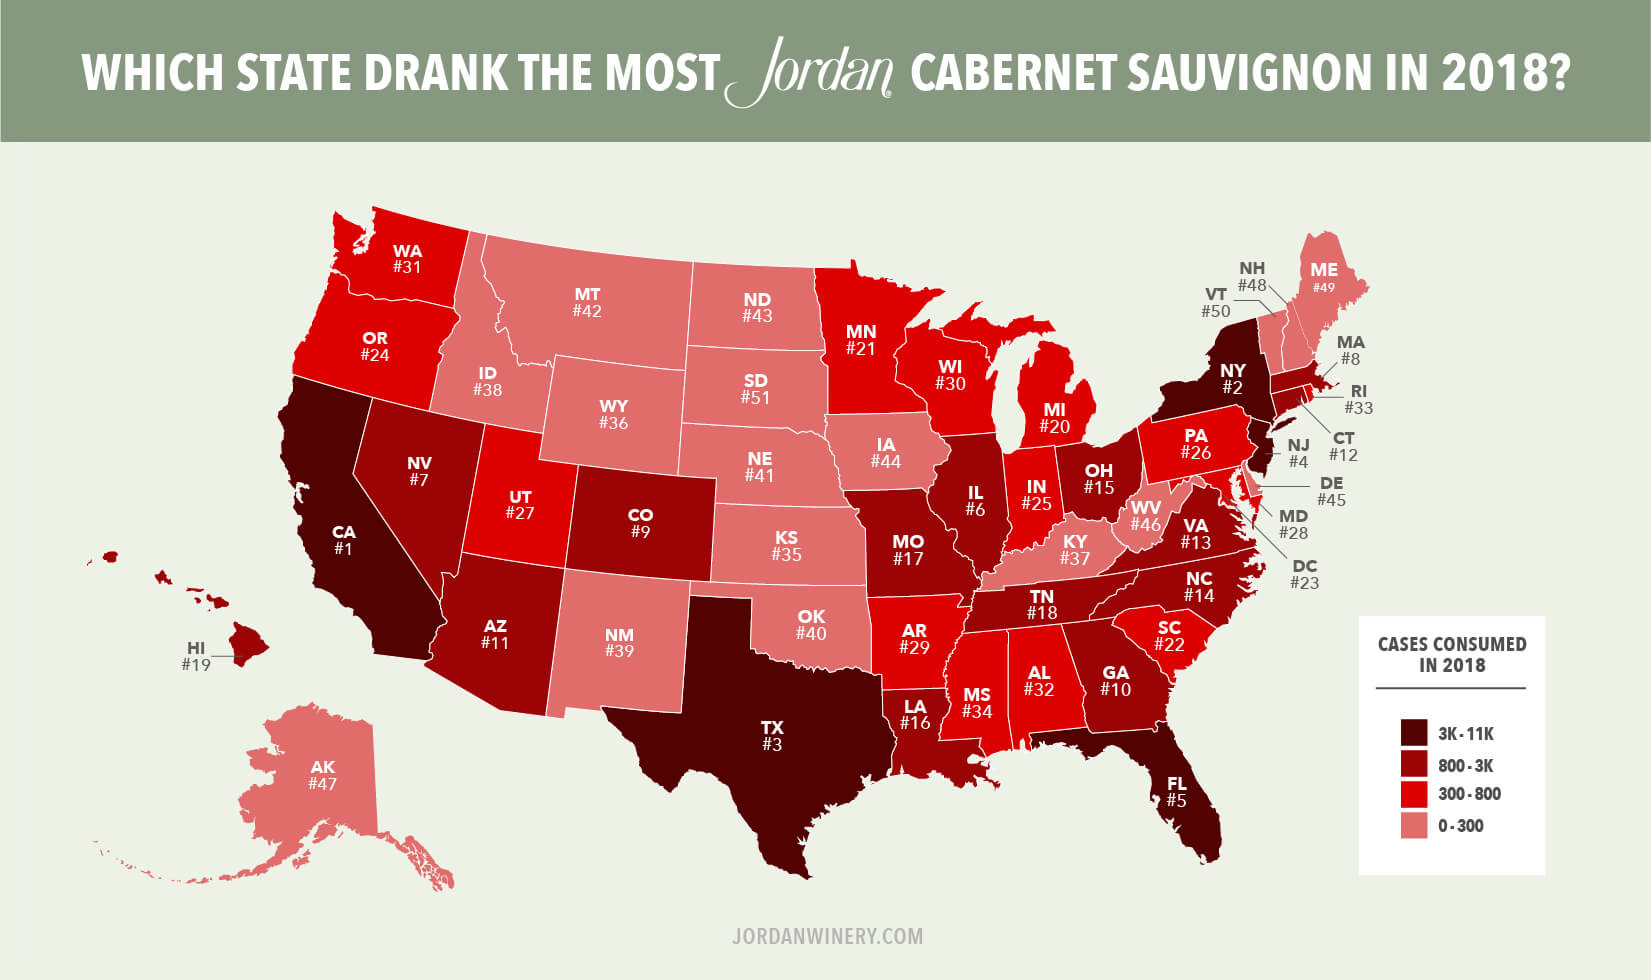 Jordan Cabernet Sauvignon Map: Who Drank the Most by State 2018